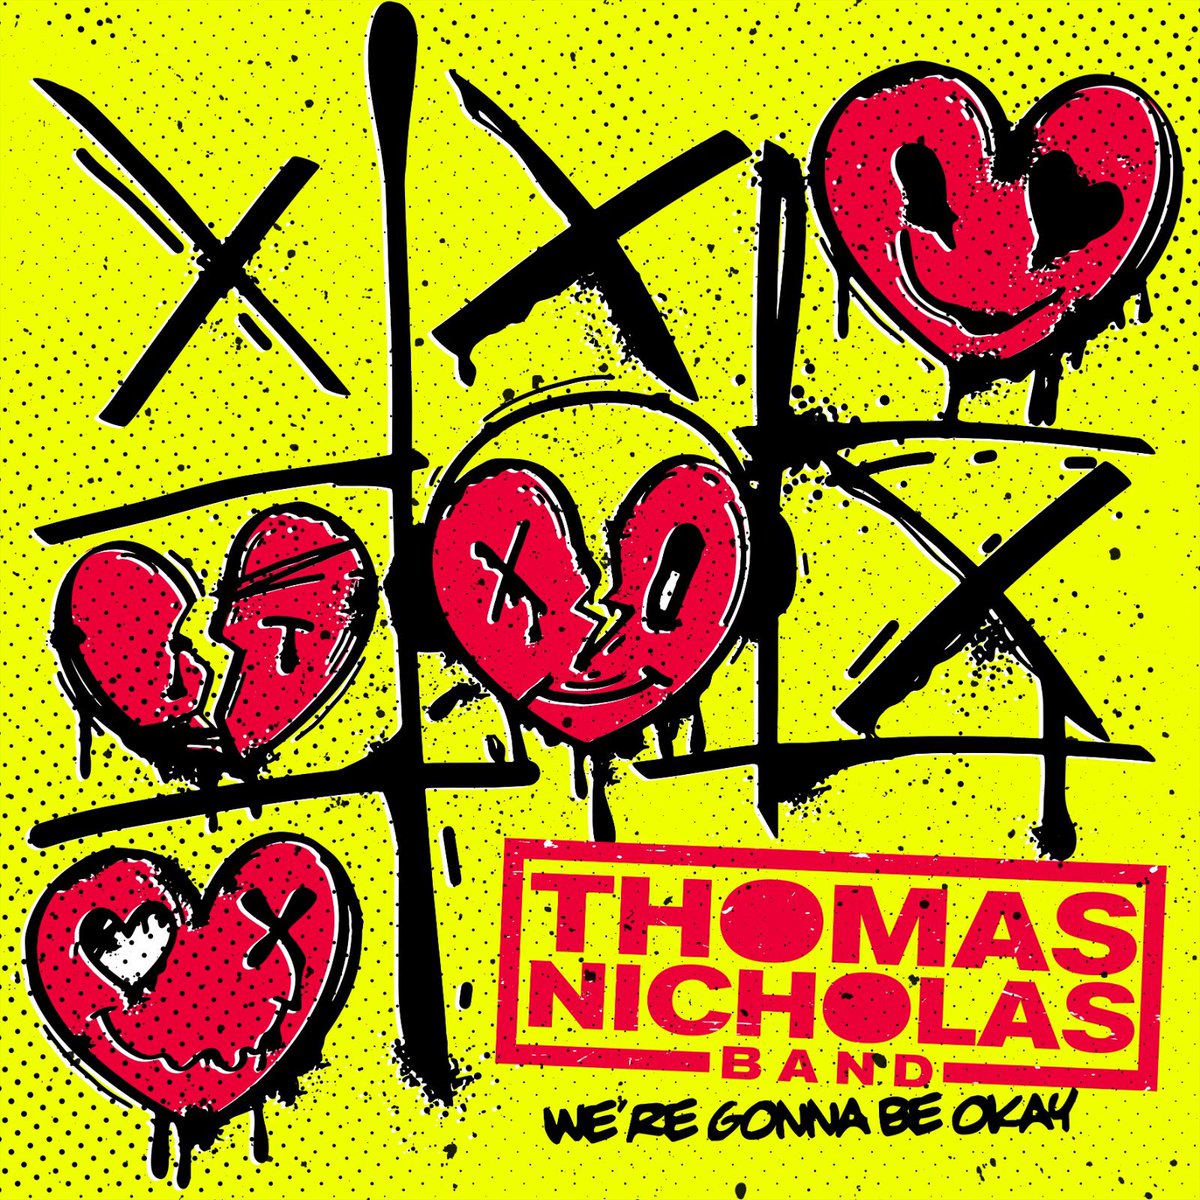 The Thomas Nicholas Band have just released #WereGonnaBeOkay and what an absolutely outstanding album it is! Check out our interview with the #AmericanPie actor himself at rocktoday.co.uk We go deep into the music! @TINBand Pls share & Repost!